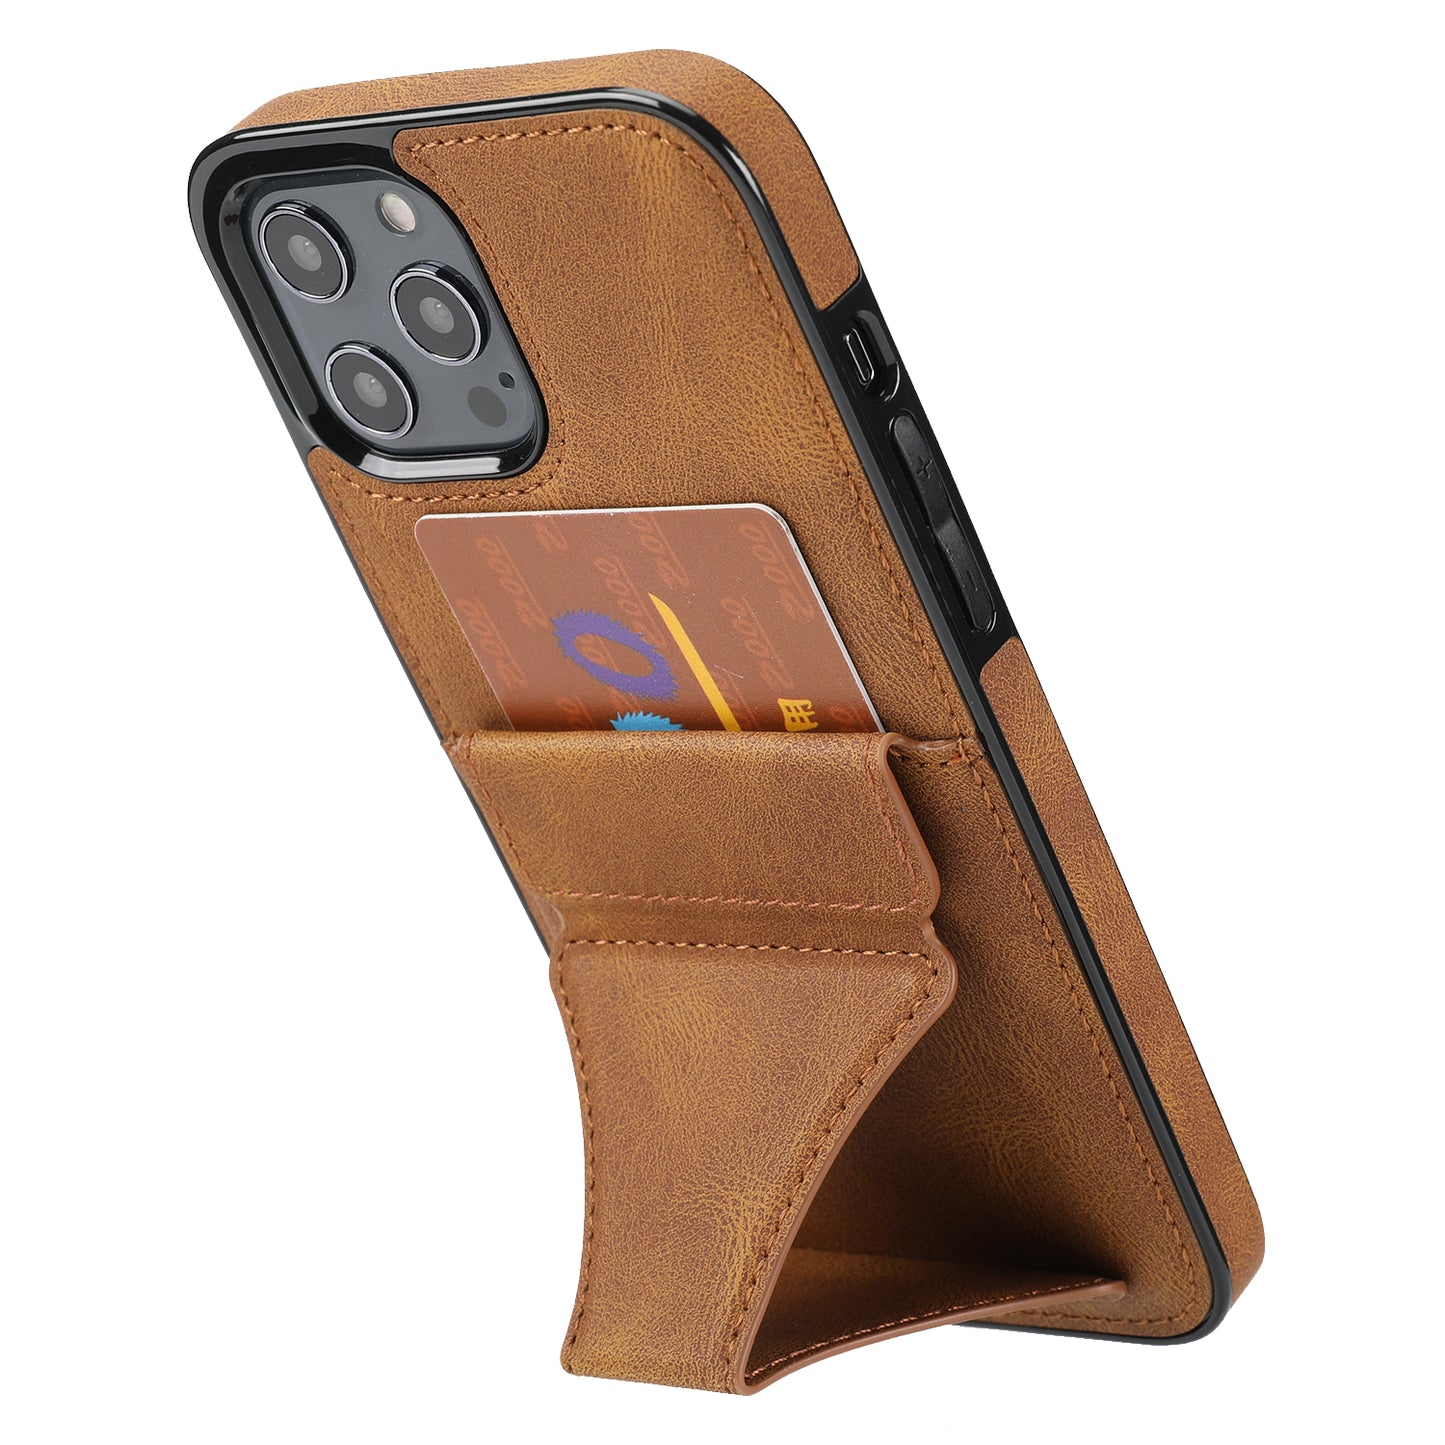 Mobile  Phone  Protective  Cover Solid Color Full Protector Anti-shock Anti-scratch Anti-slip Anti-fouling Phone Shell Compatible For Iphone 11 12 13 Series Brown_Iphone 12 por max ZopiStyle